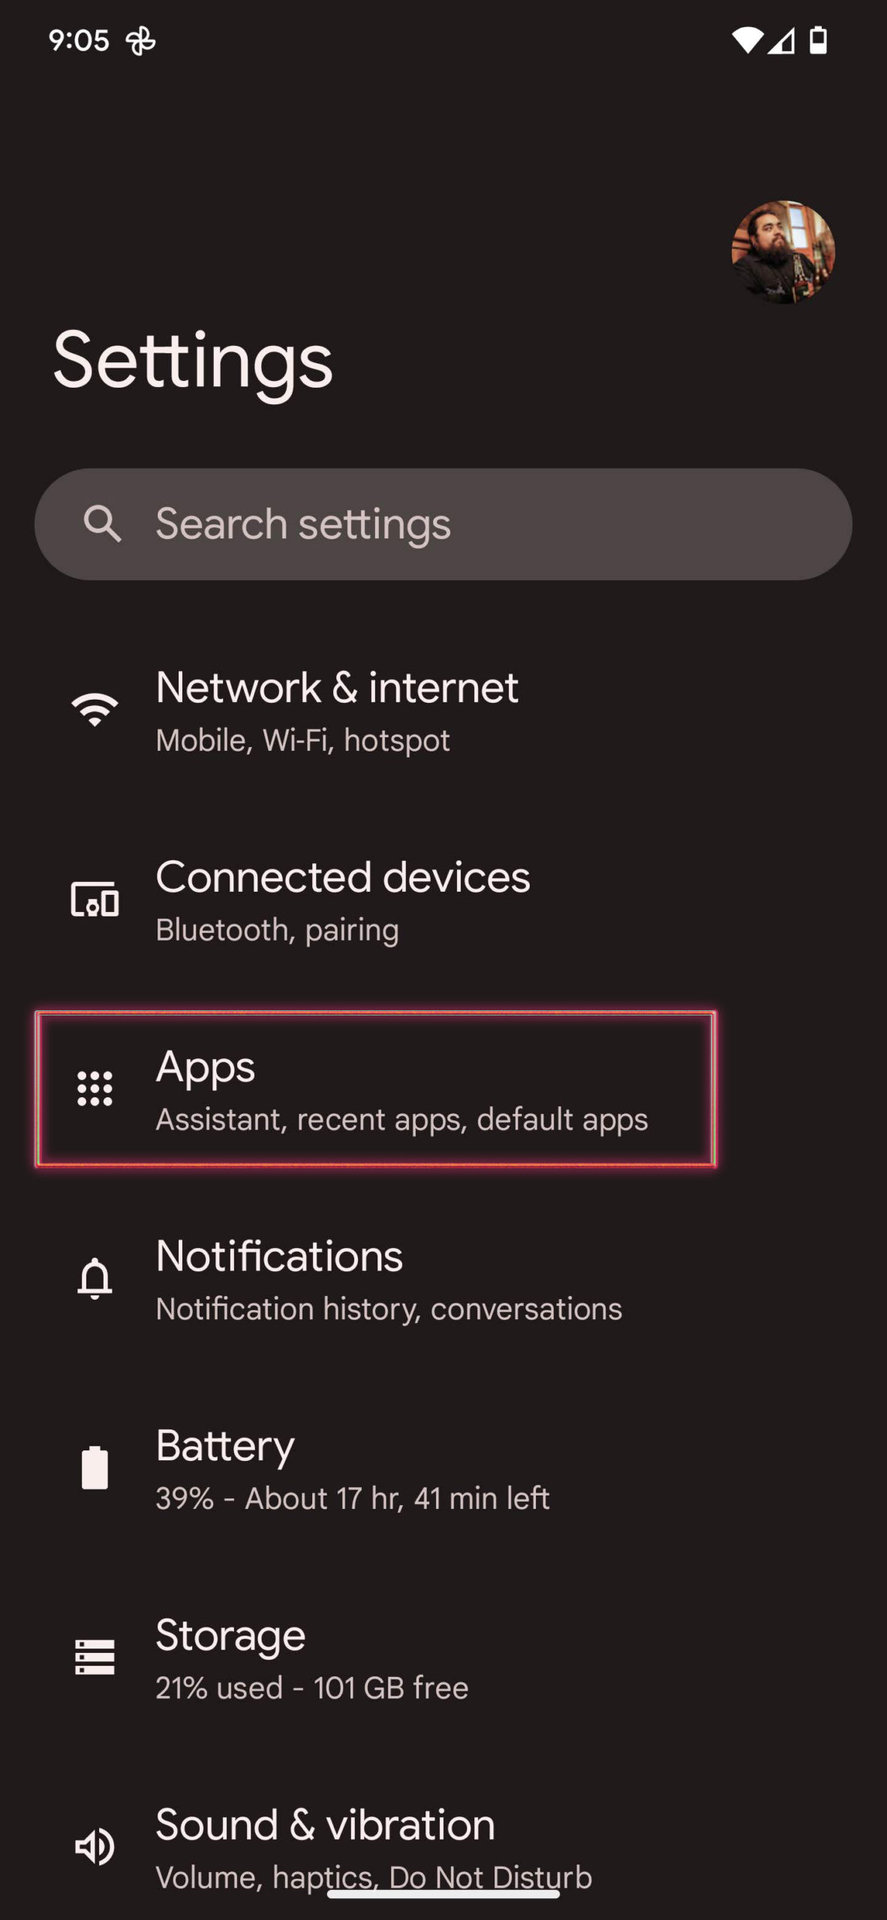 Go to your device settings.
Select the "Apps" or "Applications" option.